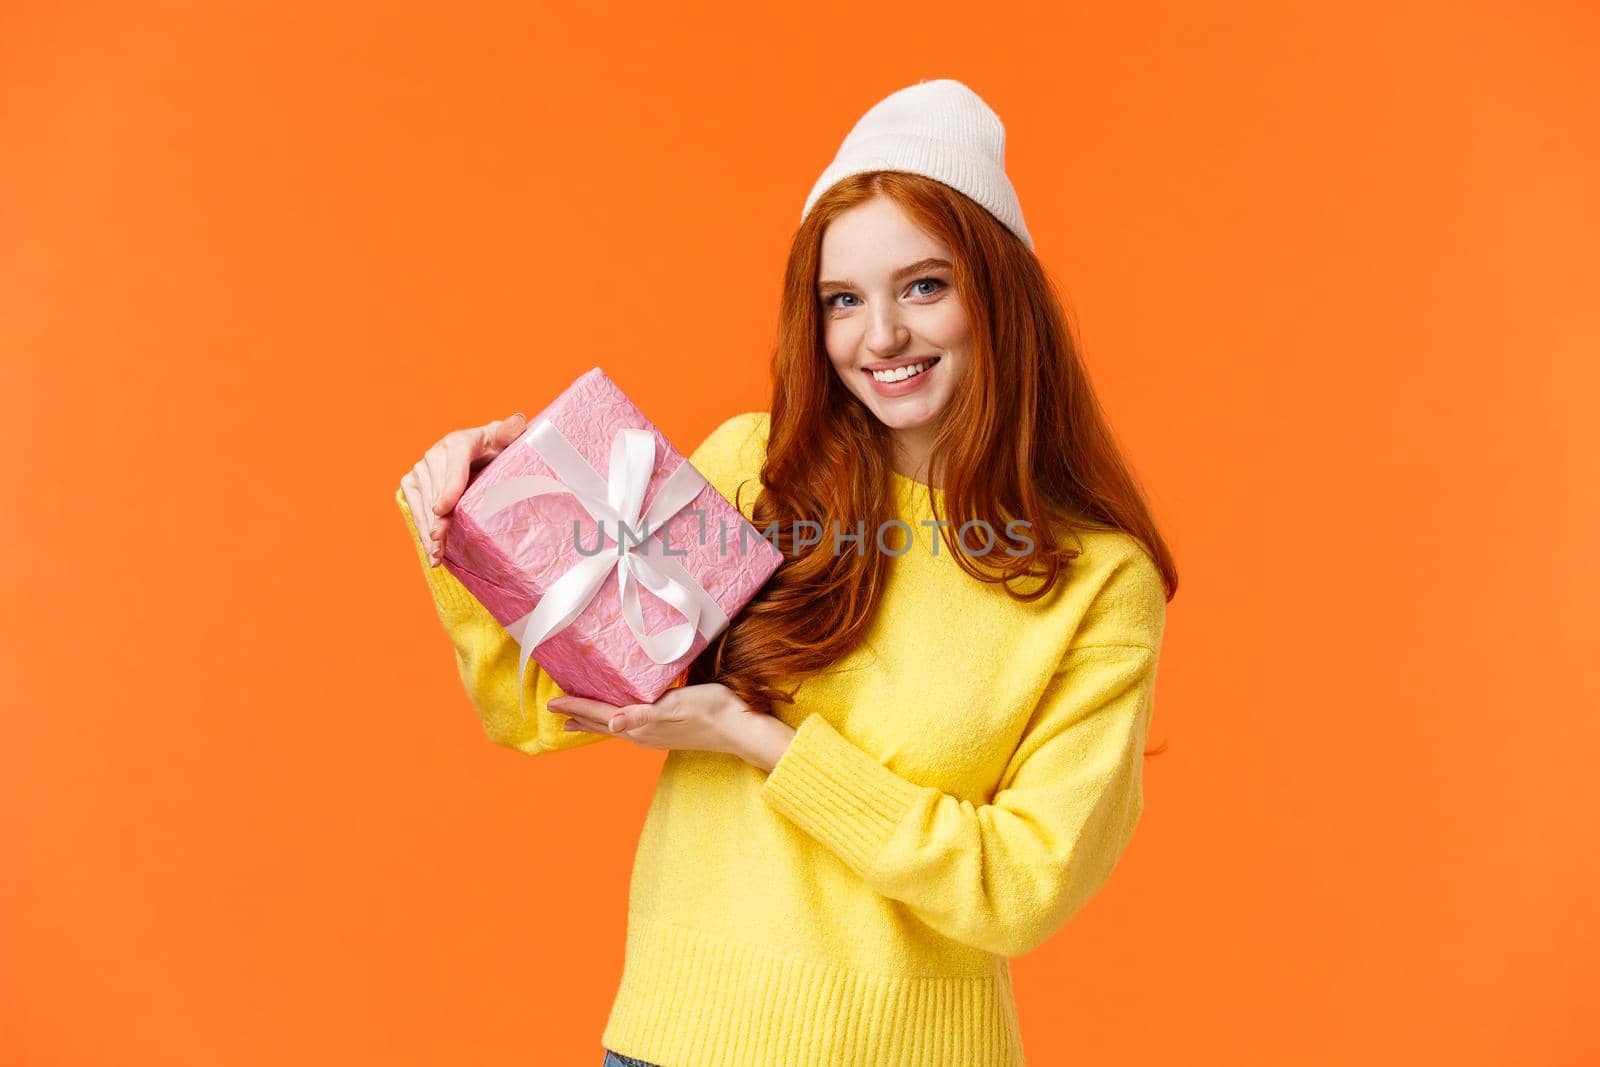 Lovely and romantic cute redhead woman prepared gift for valentines day, wrapped present in pink paper, showing box friend and smiling cheerful, standing upbeat orange background in winter hat.